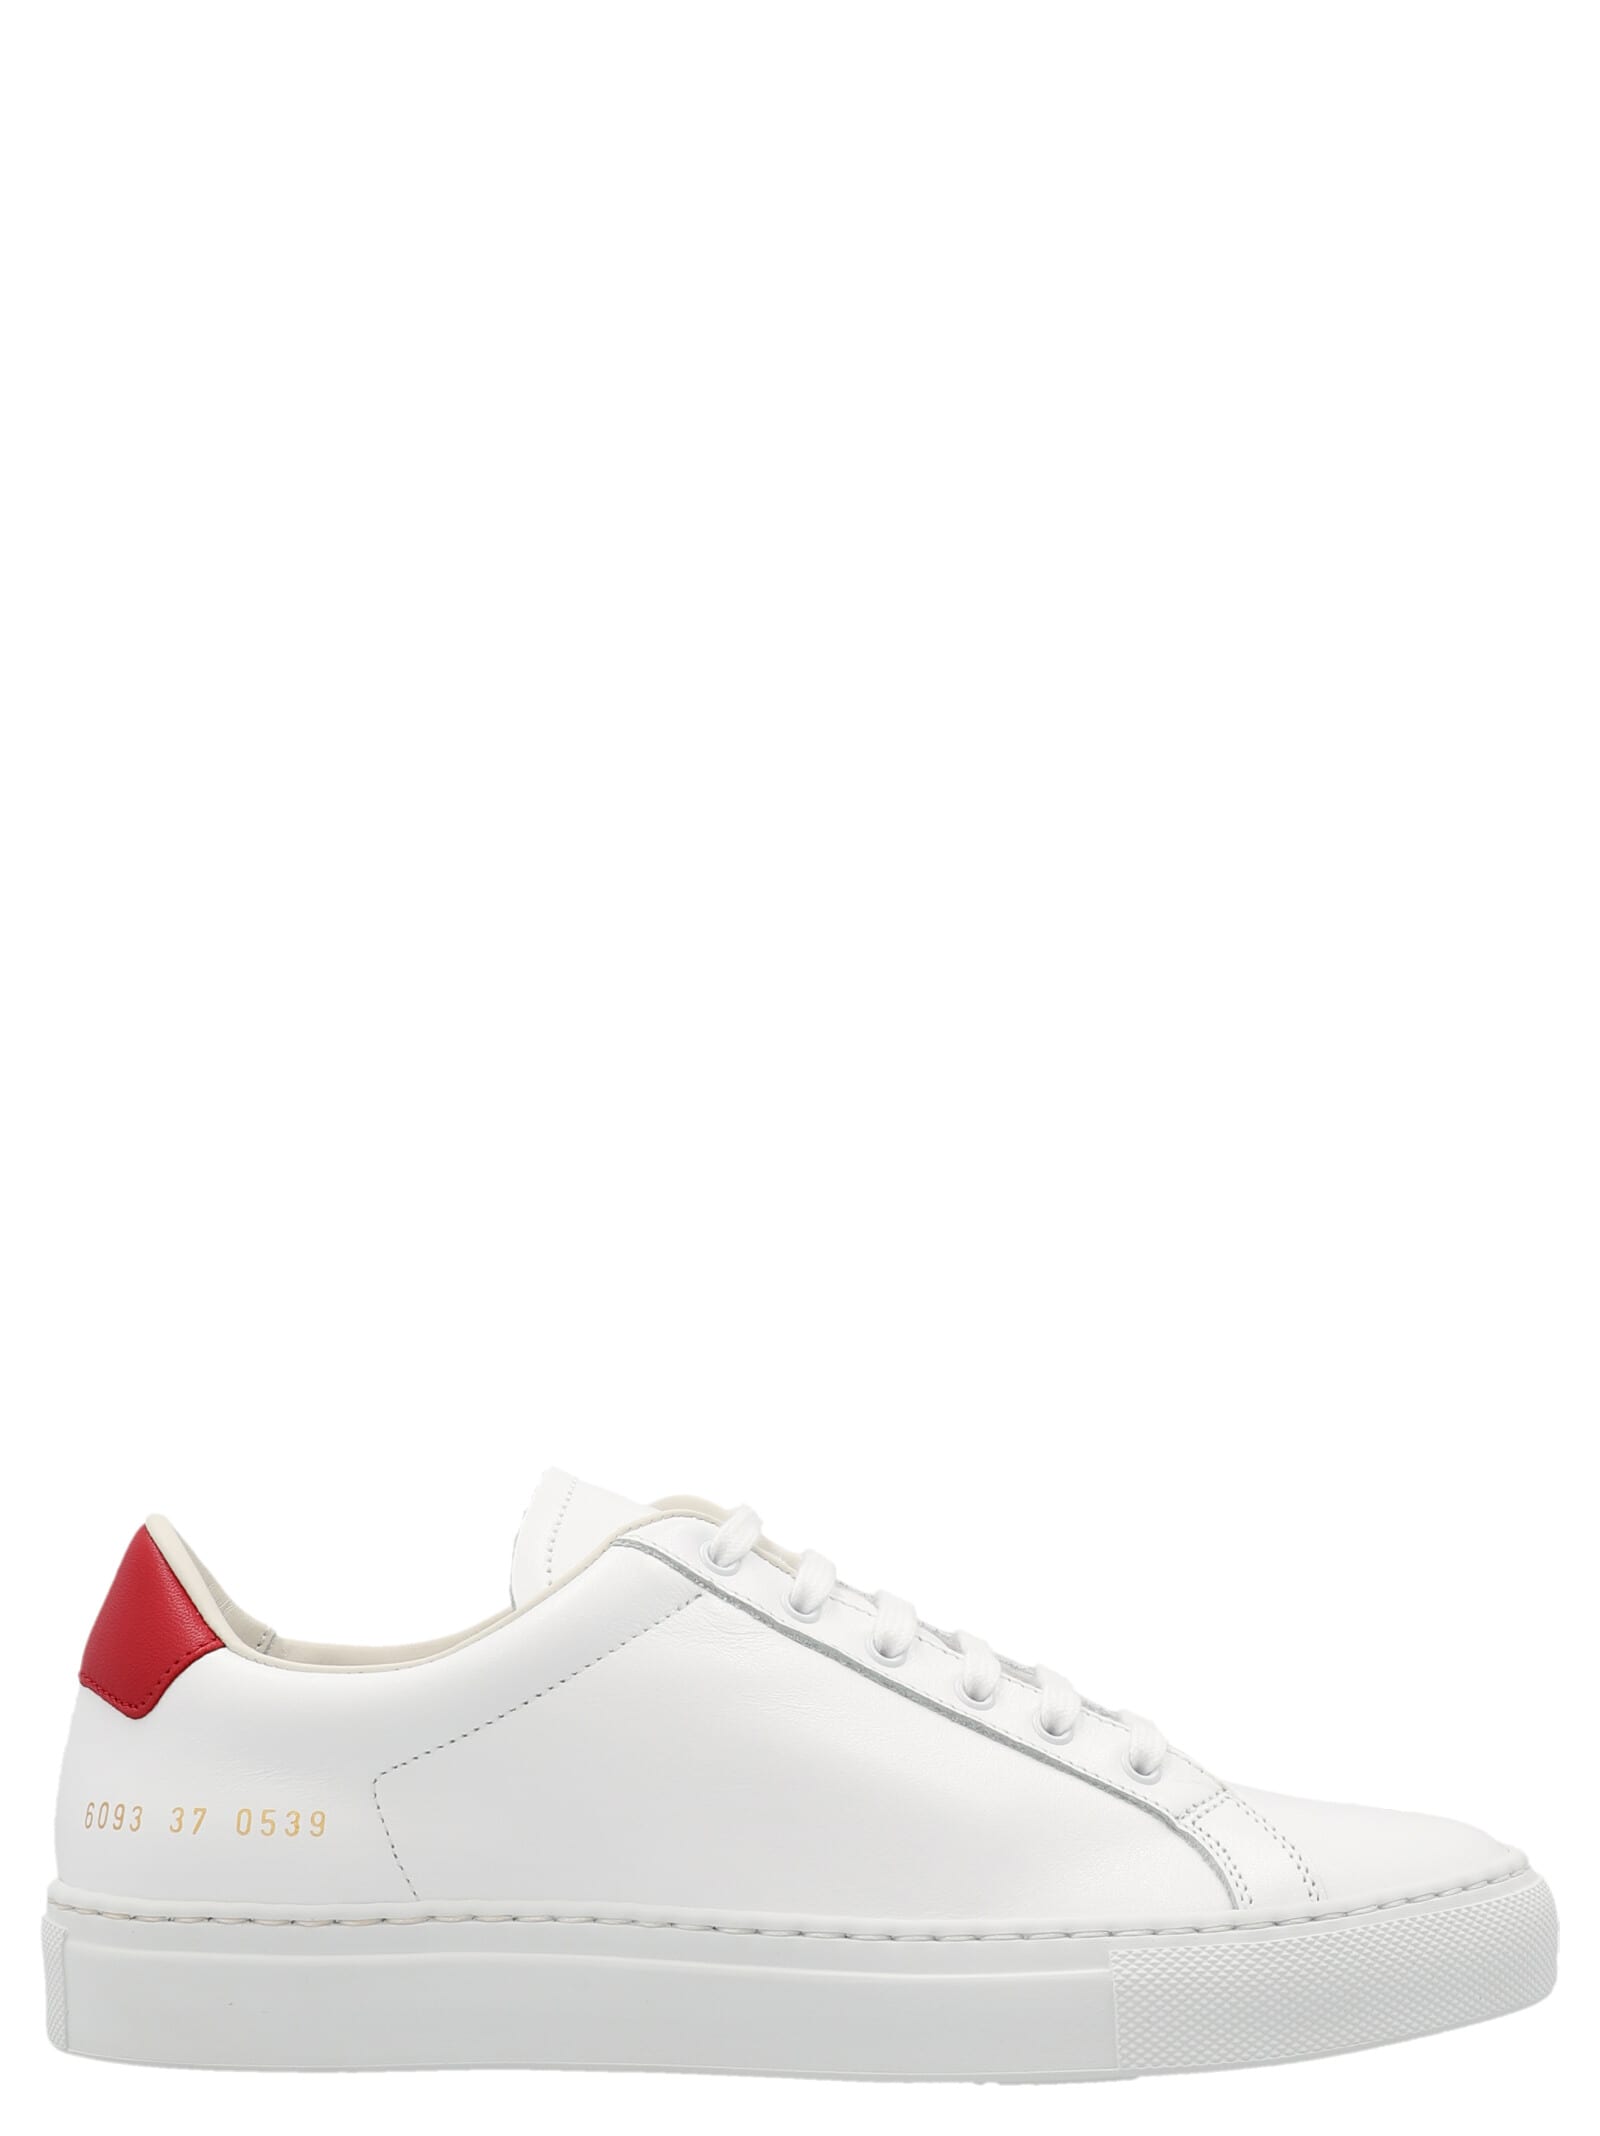 Common Projects retro Low Sneakers